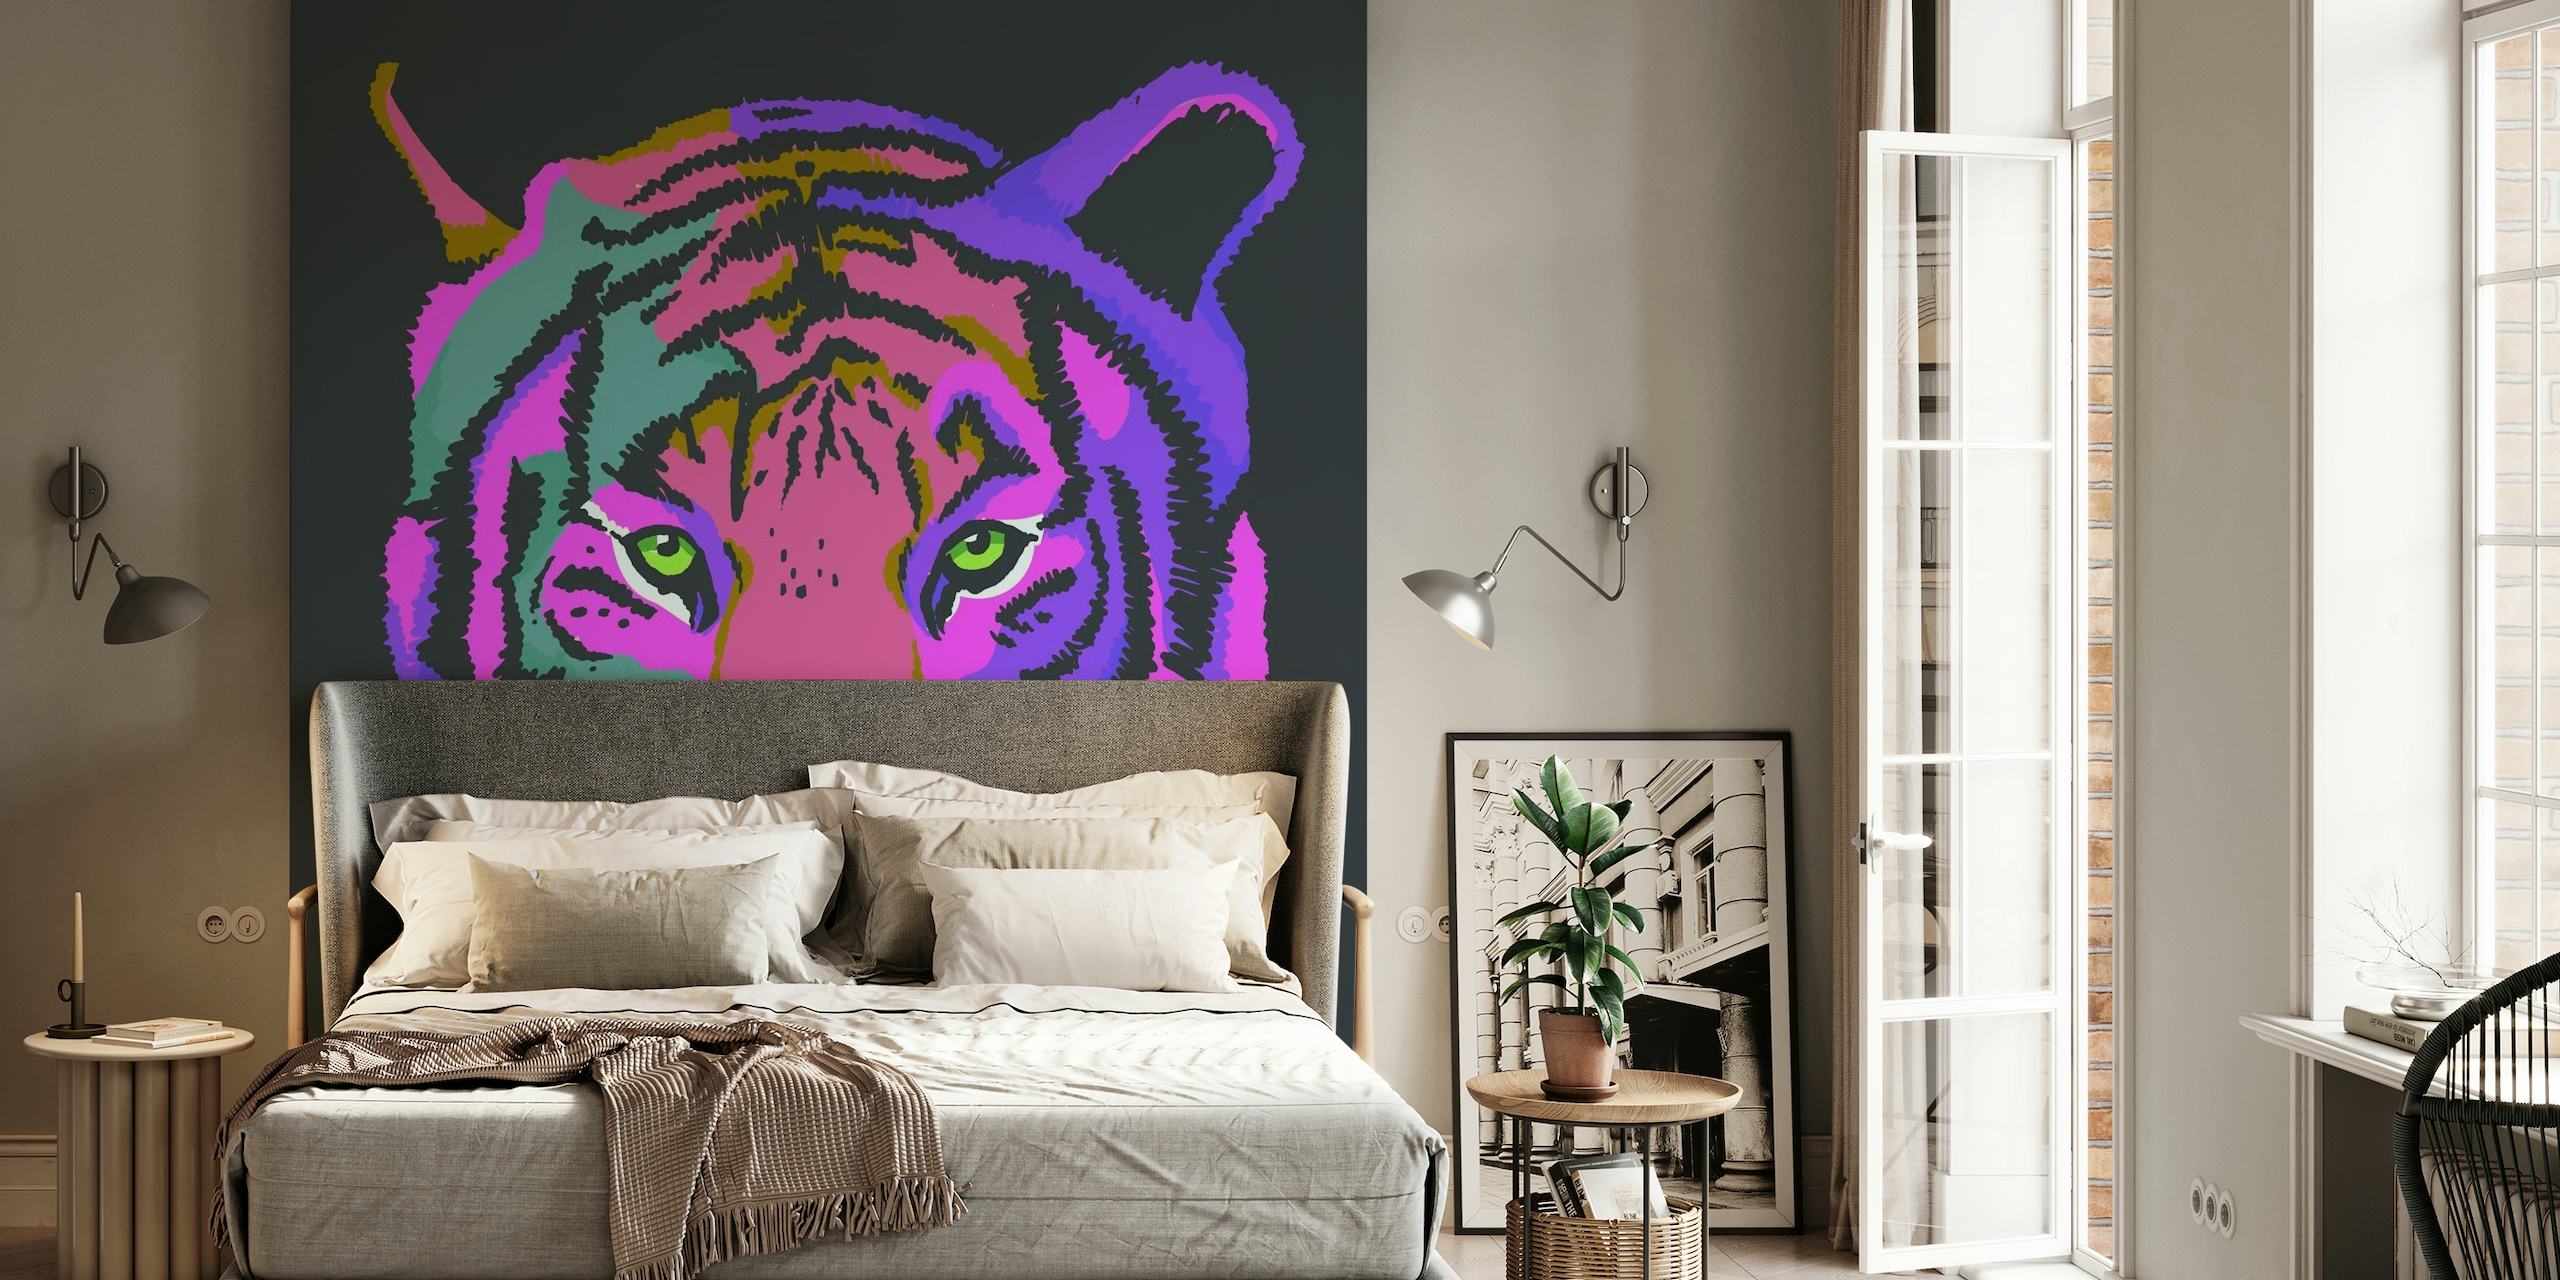 A colorful wall mural featuring a stylized tiger in shades of purple and pink against a dark background.